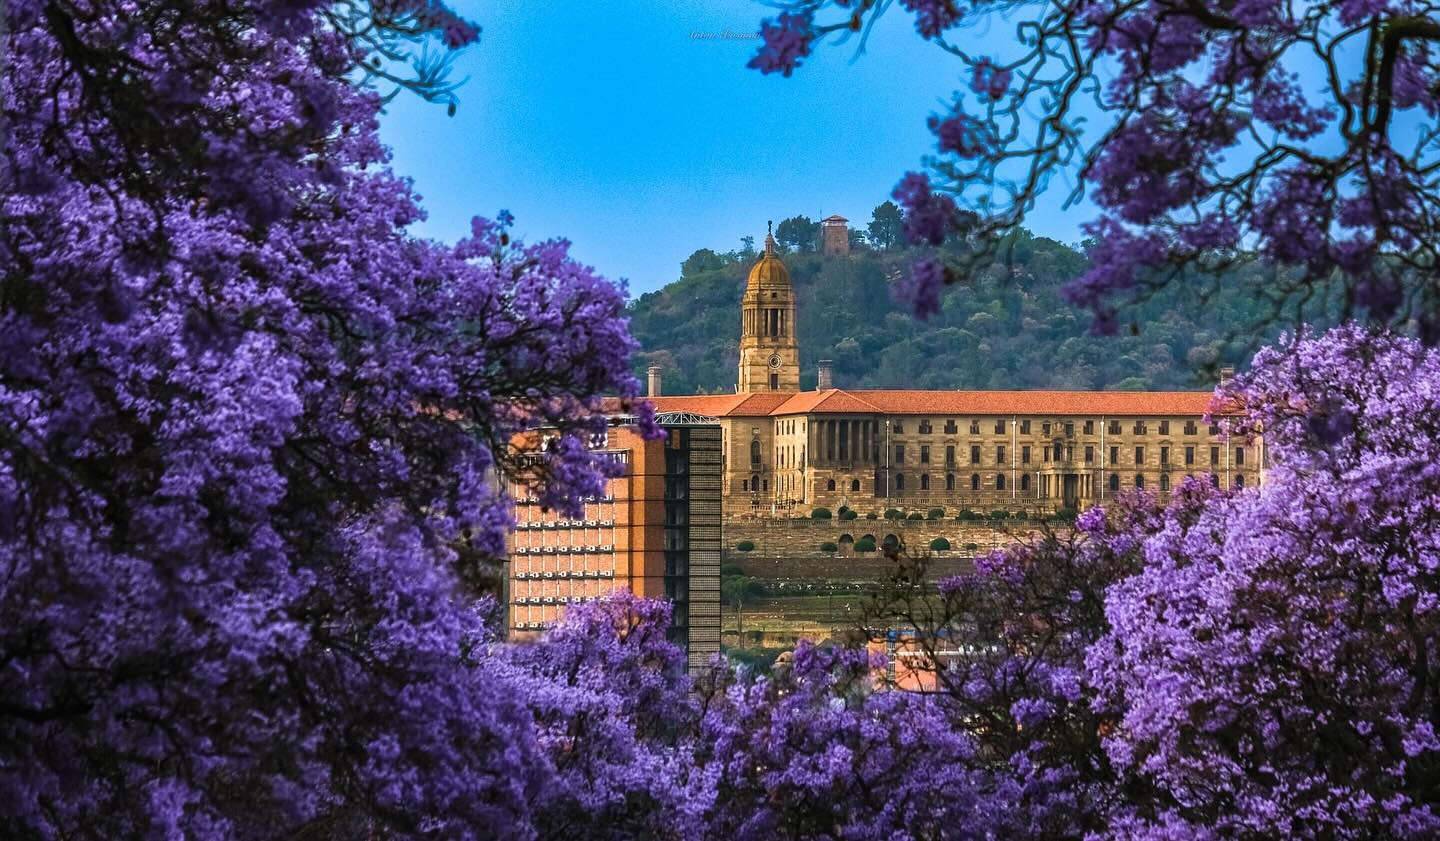 The iconic Union Buildings, framed by jacarandas in bloom. Photo: @antbosman.